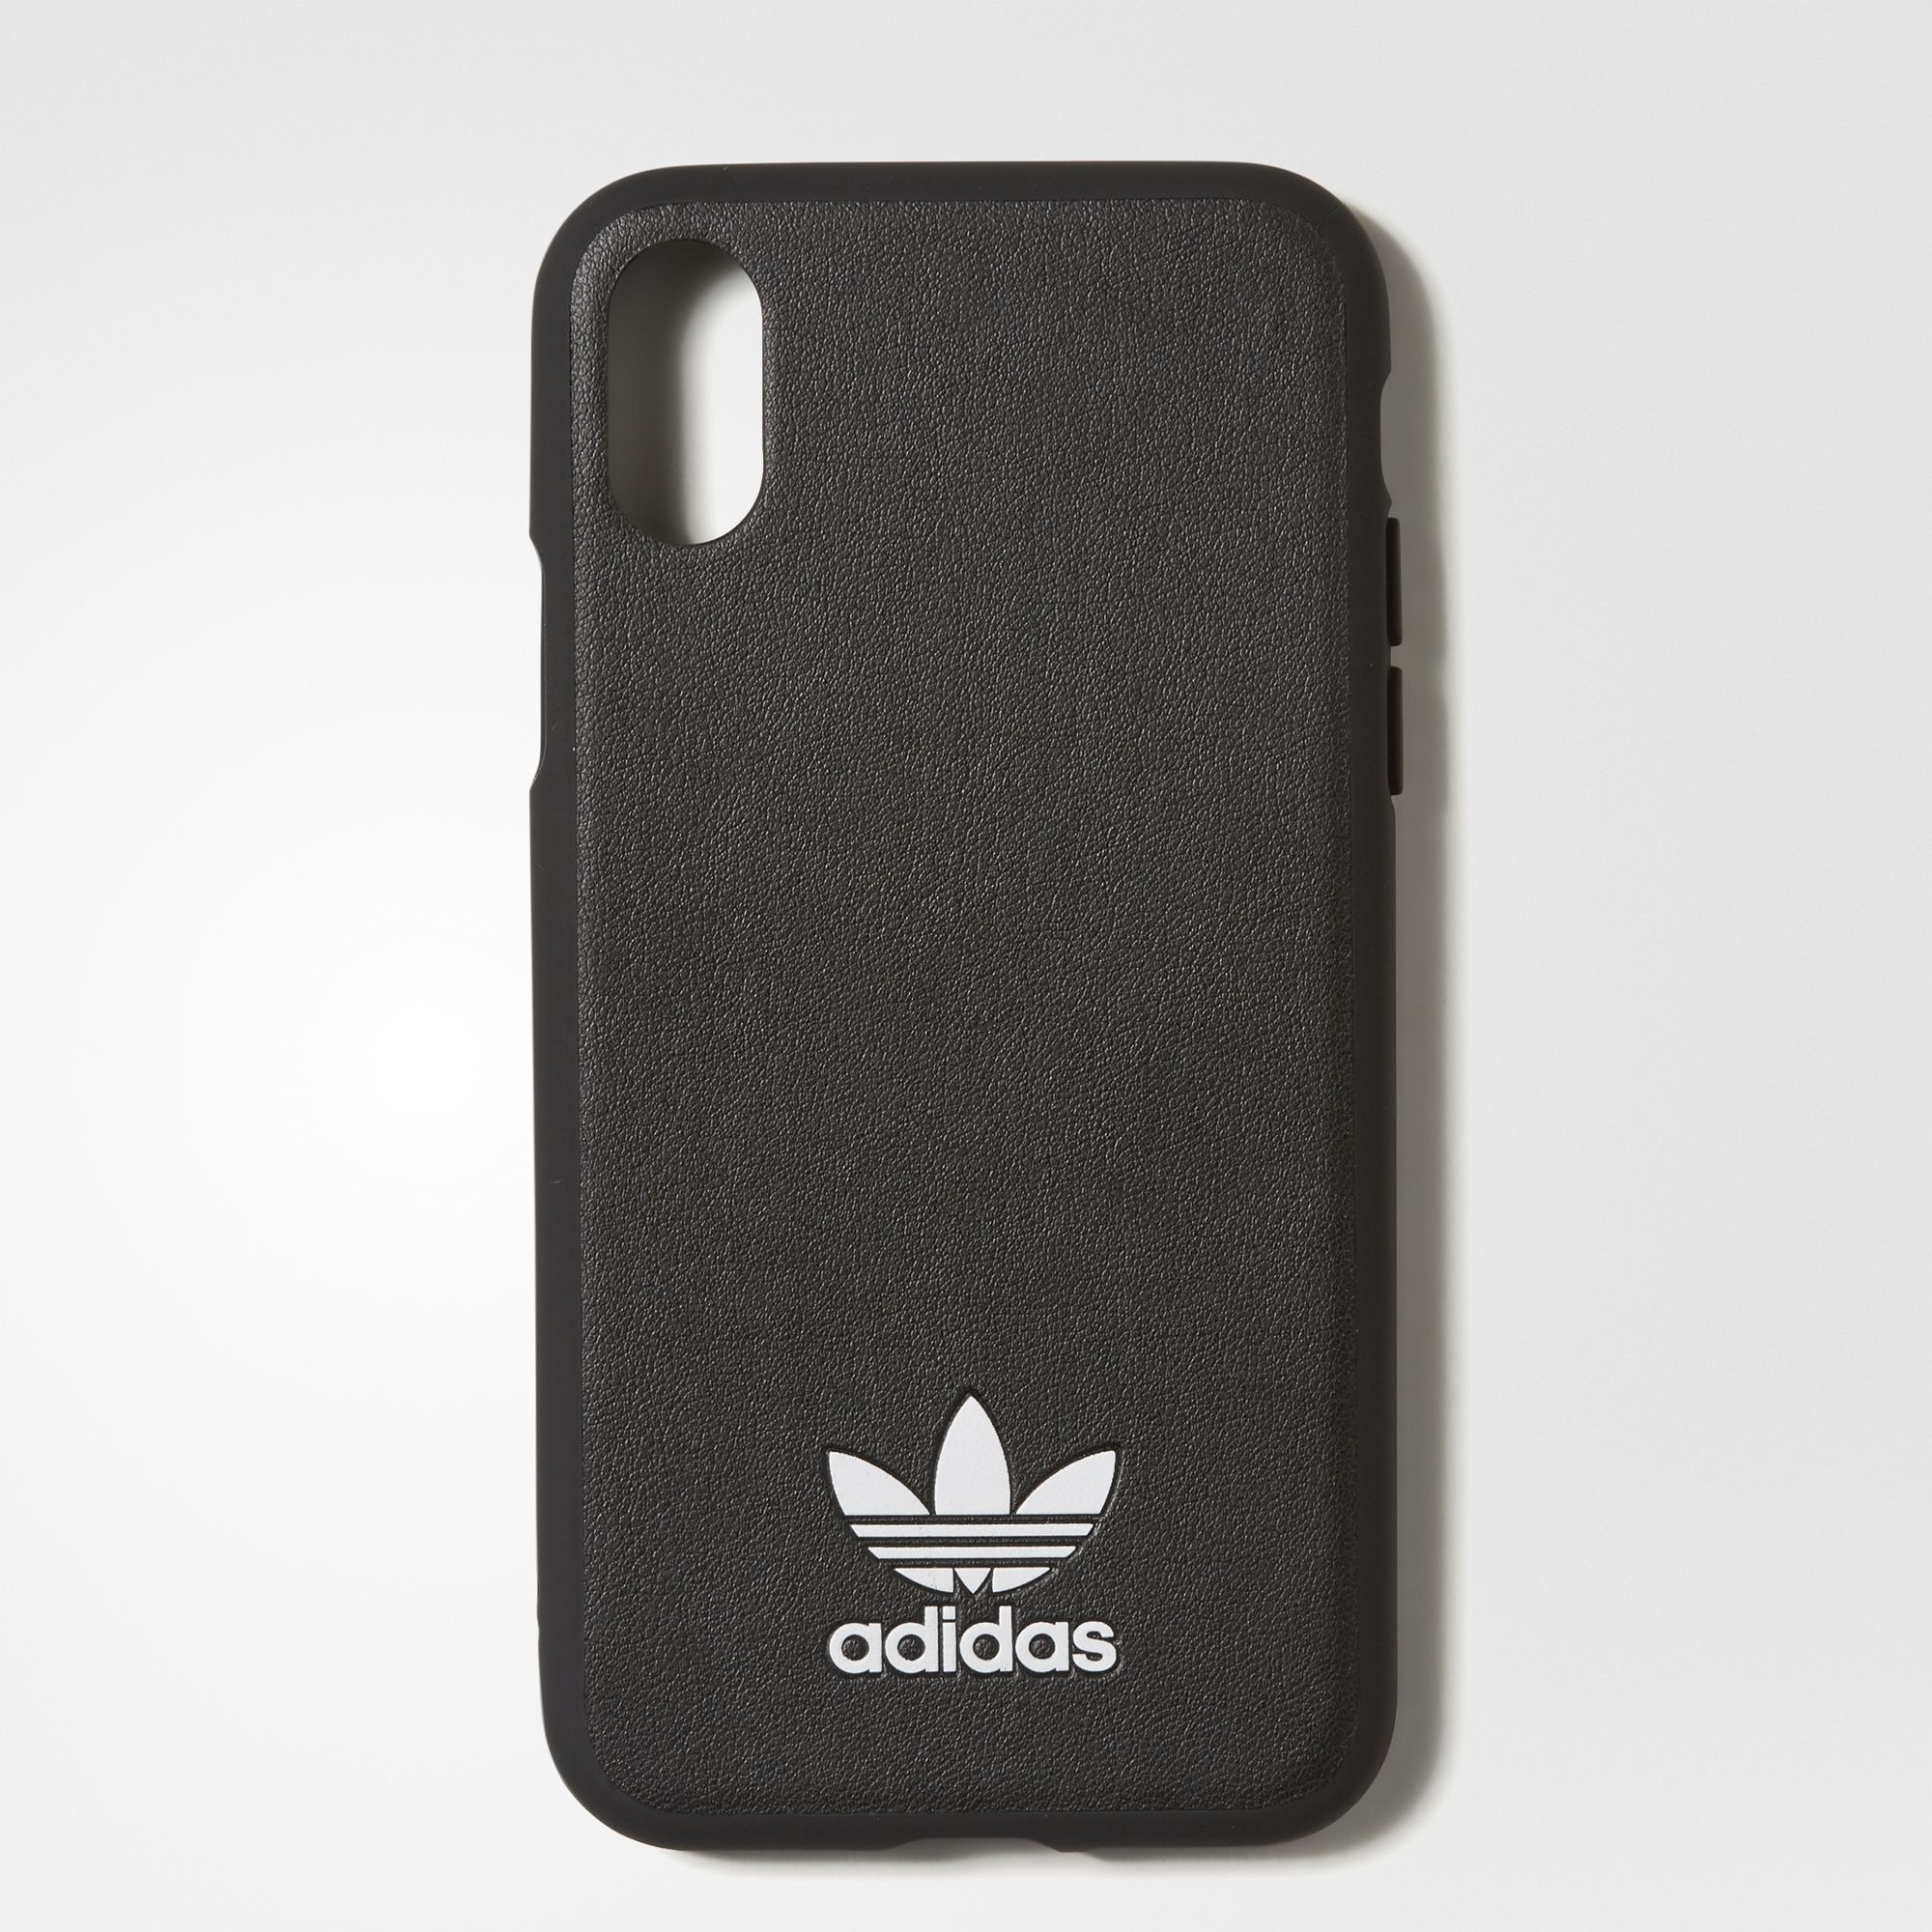 Adidas TPU Moulded Case Black/White for iPhone X